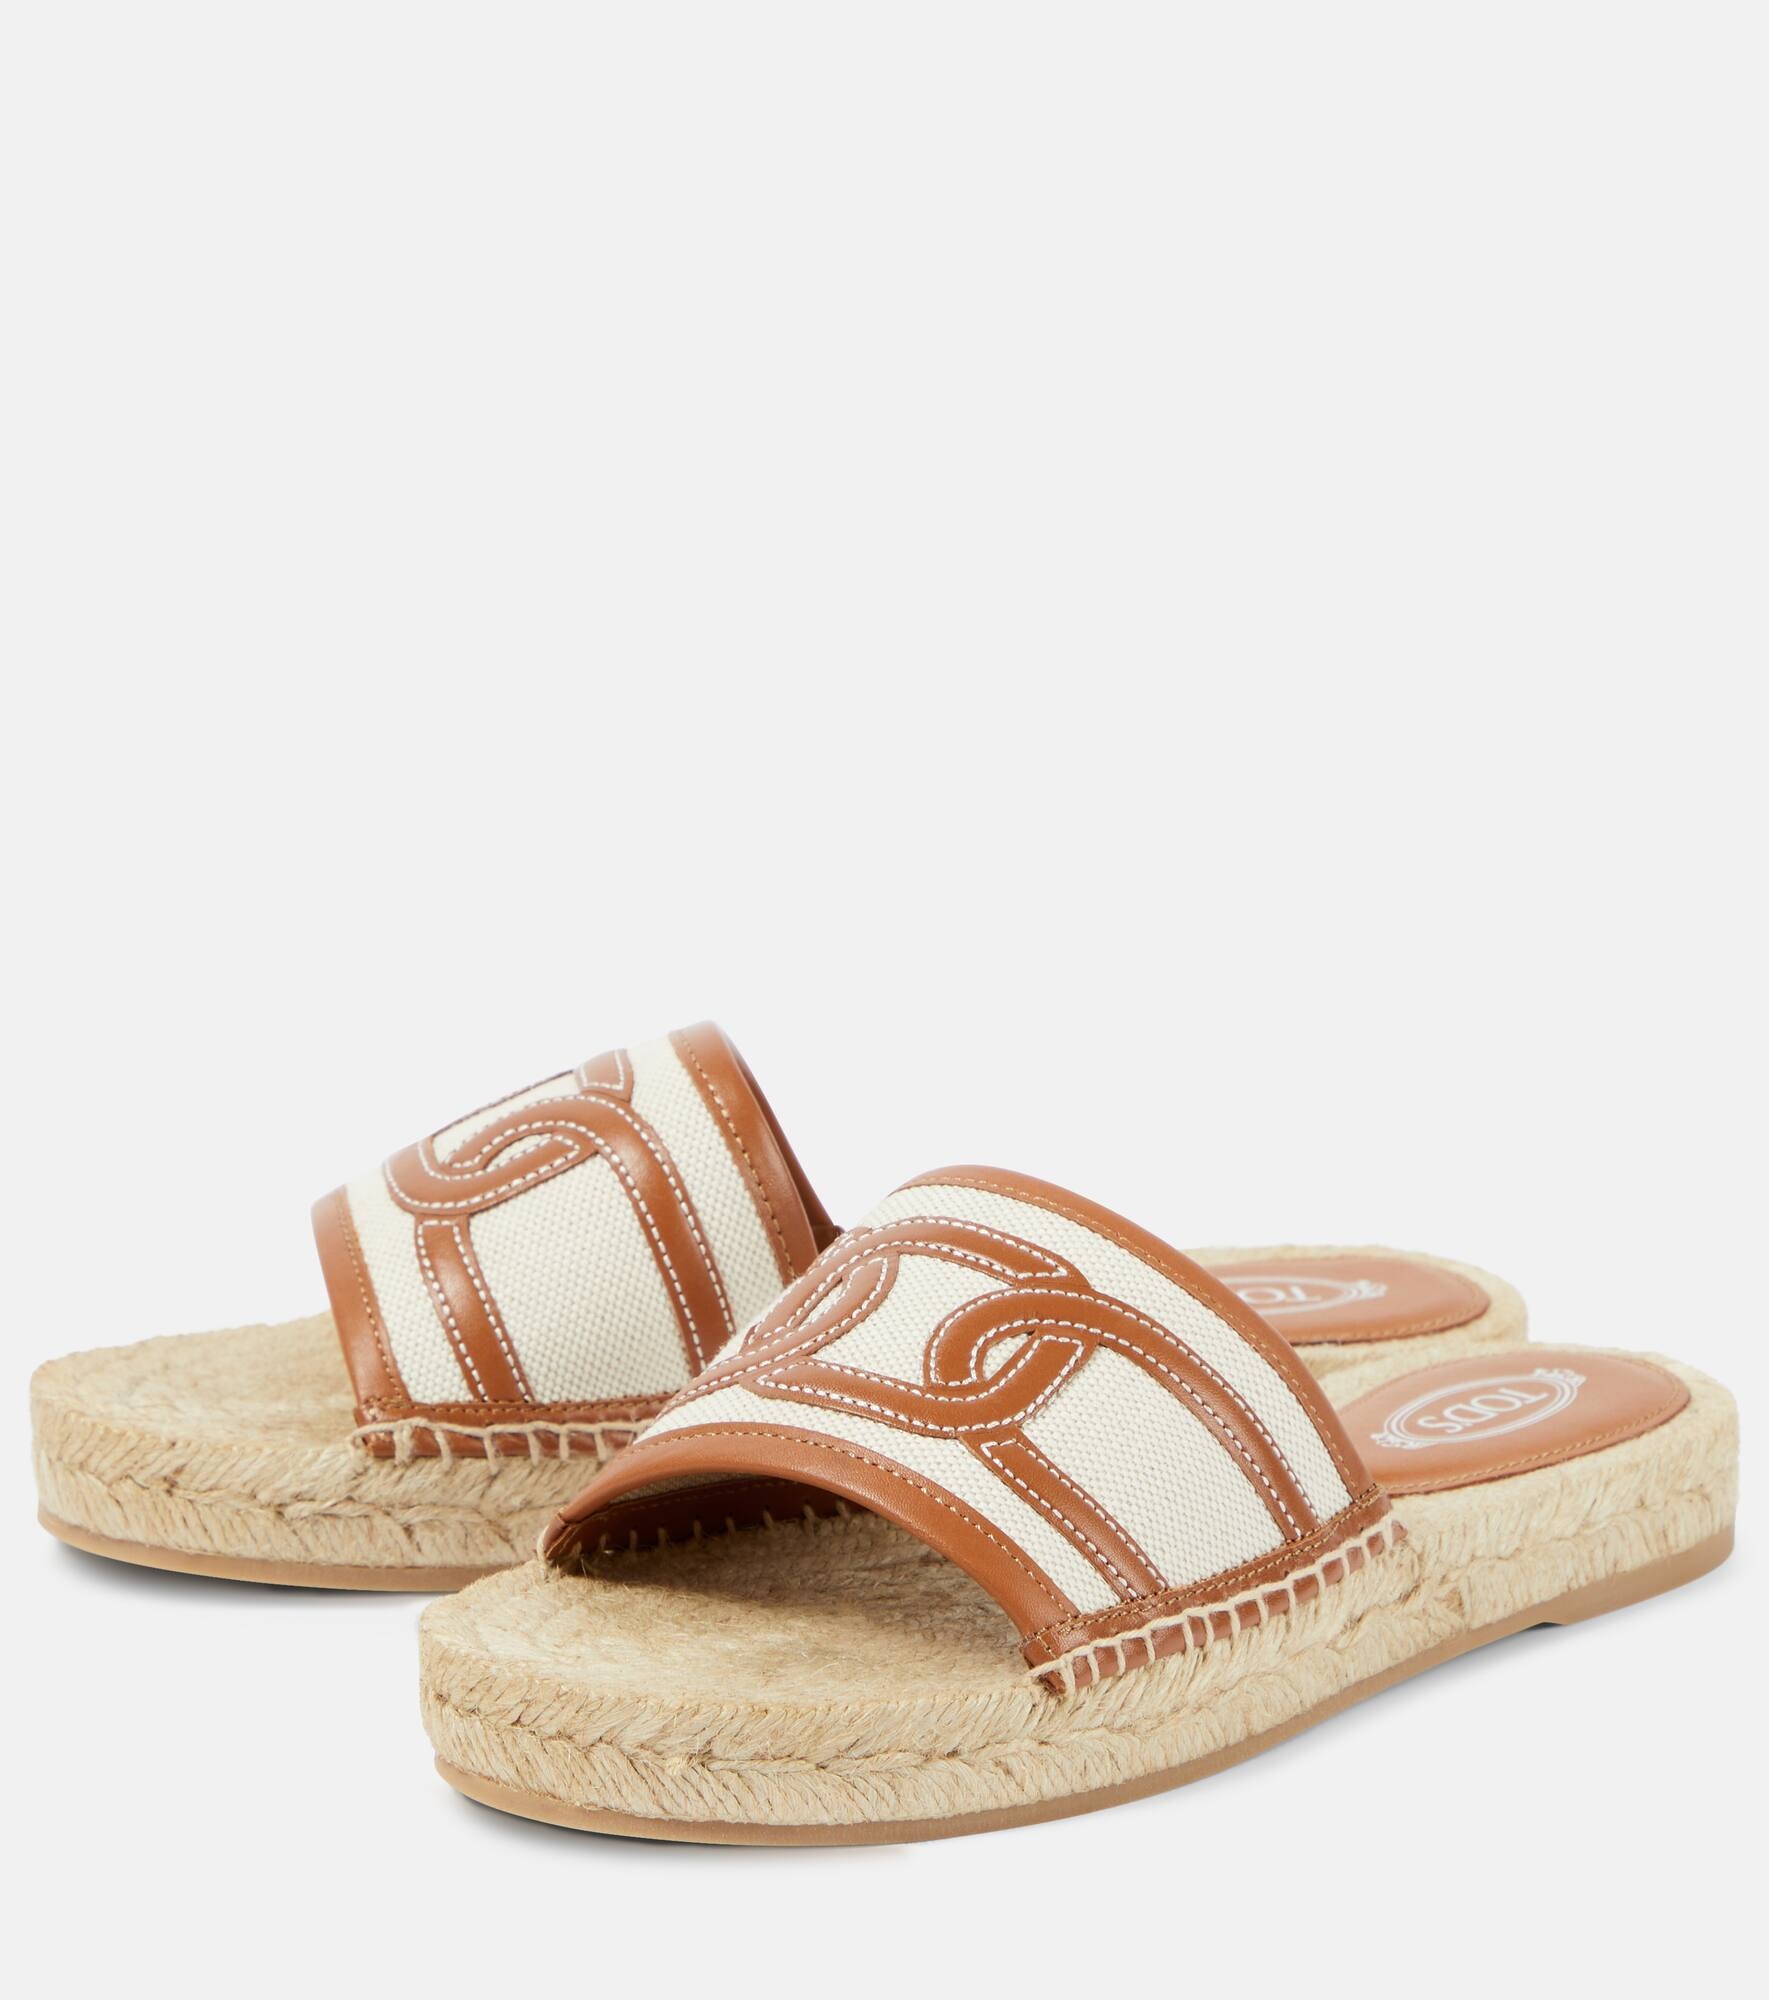 Leather-trimmed sandals - 5